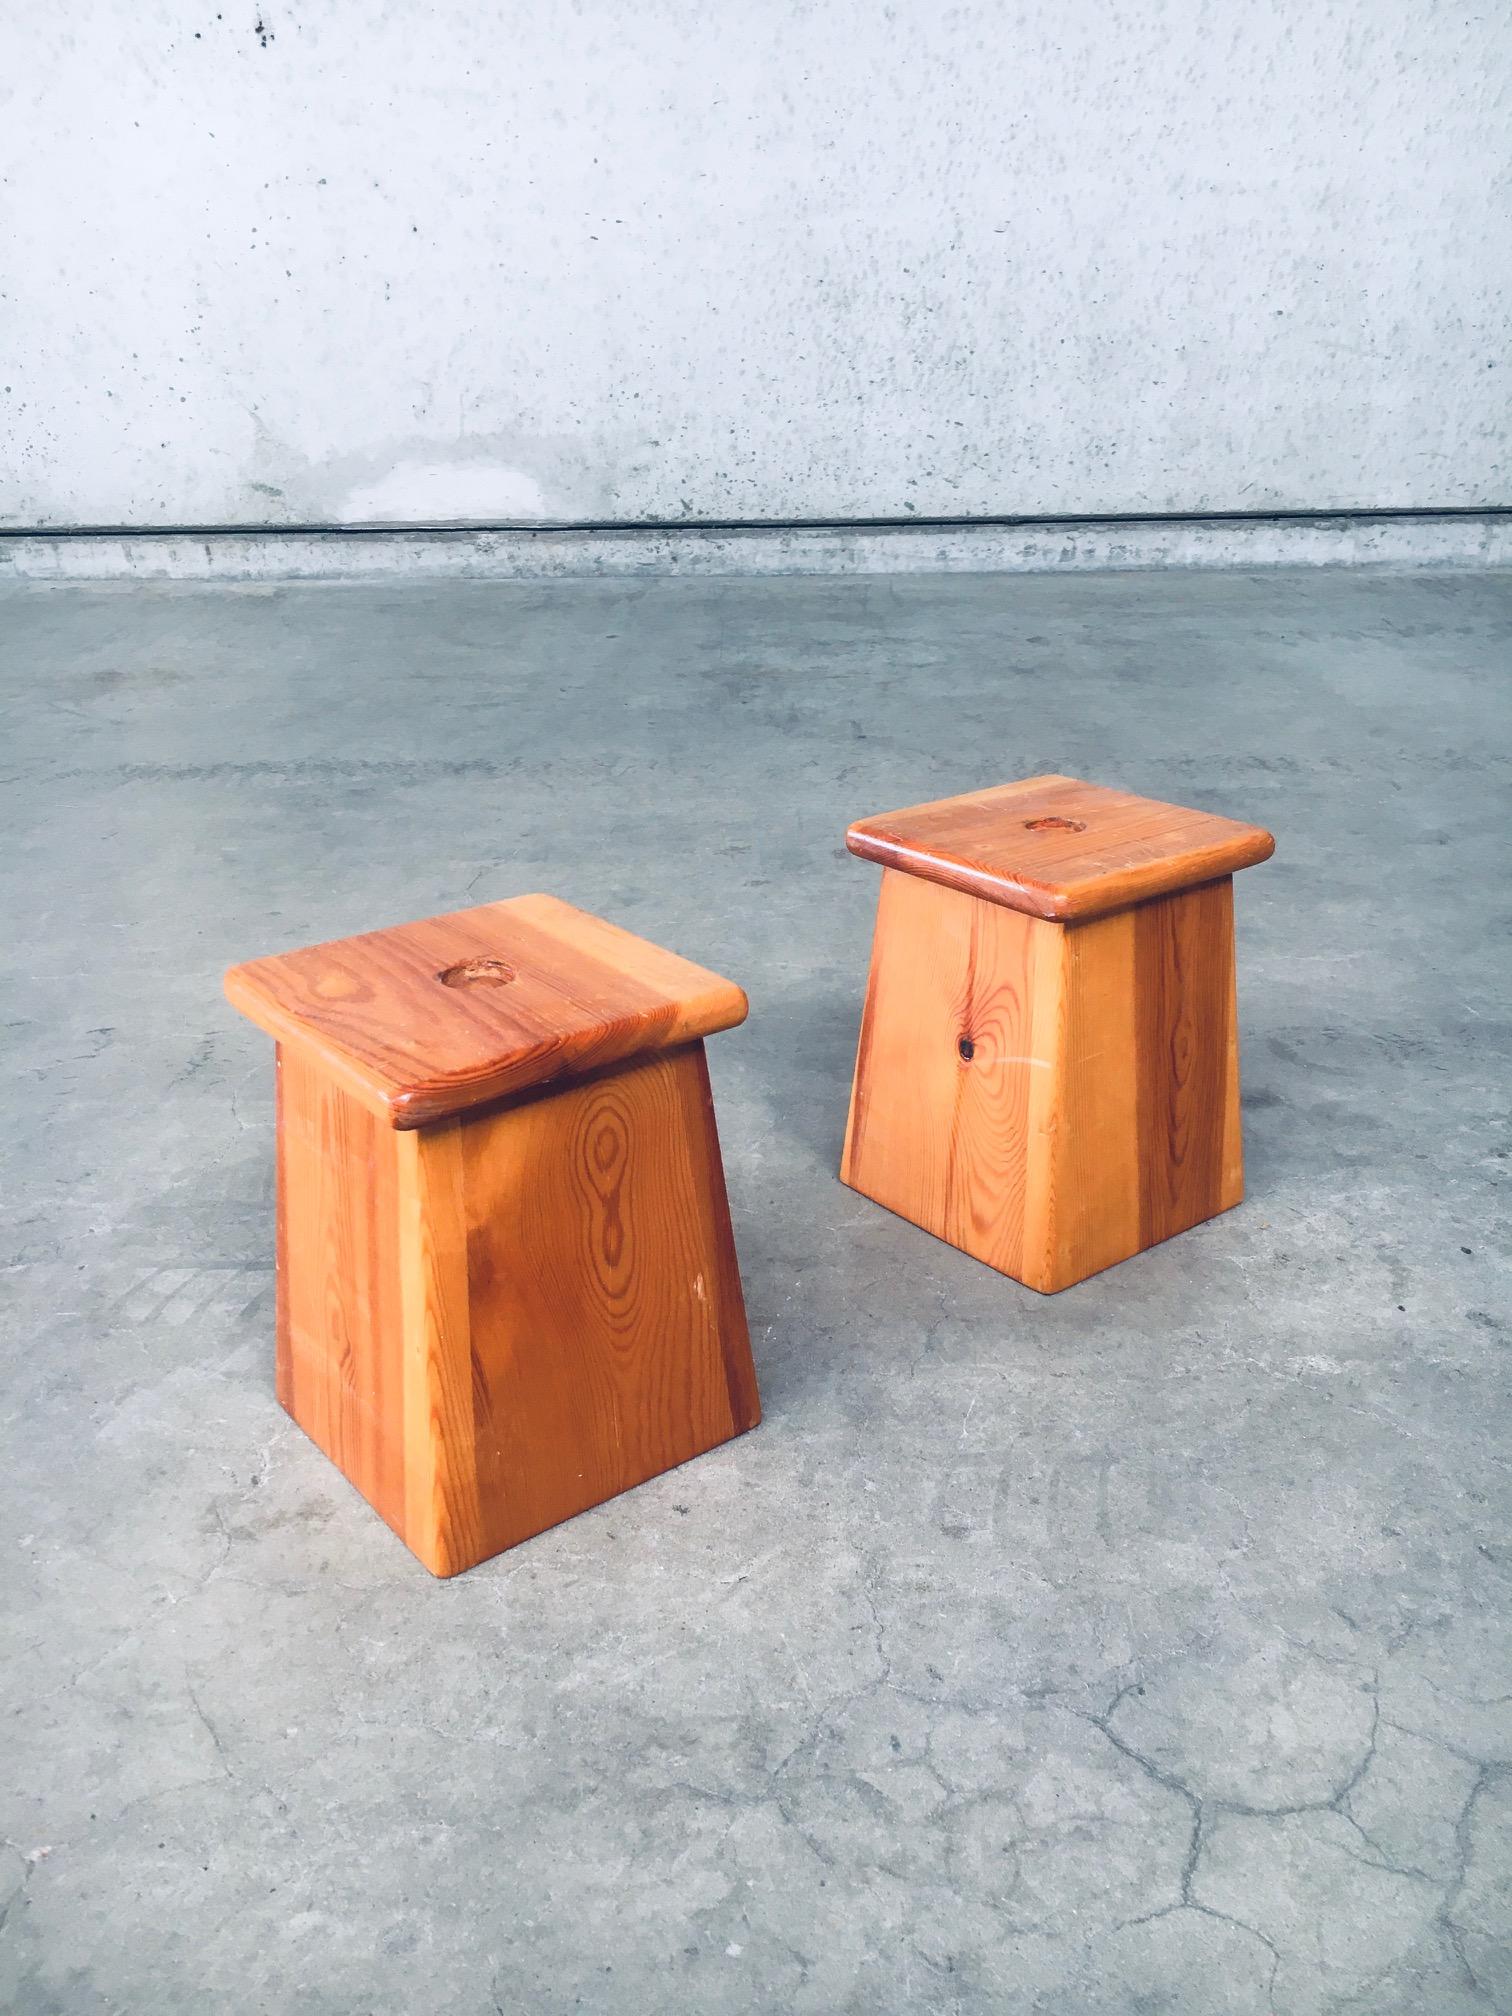 Vintage Midcentury Scandinavian Design Cone Shape Plant Side Table Pedestal set. Made in Sweden, 1960's period. Solid pine wood constructed cone shape plant or display stand set. These come in good, original condition with normal wear from their use